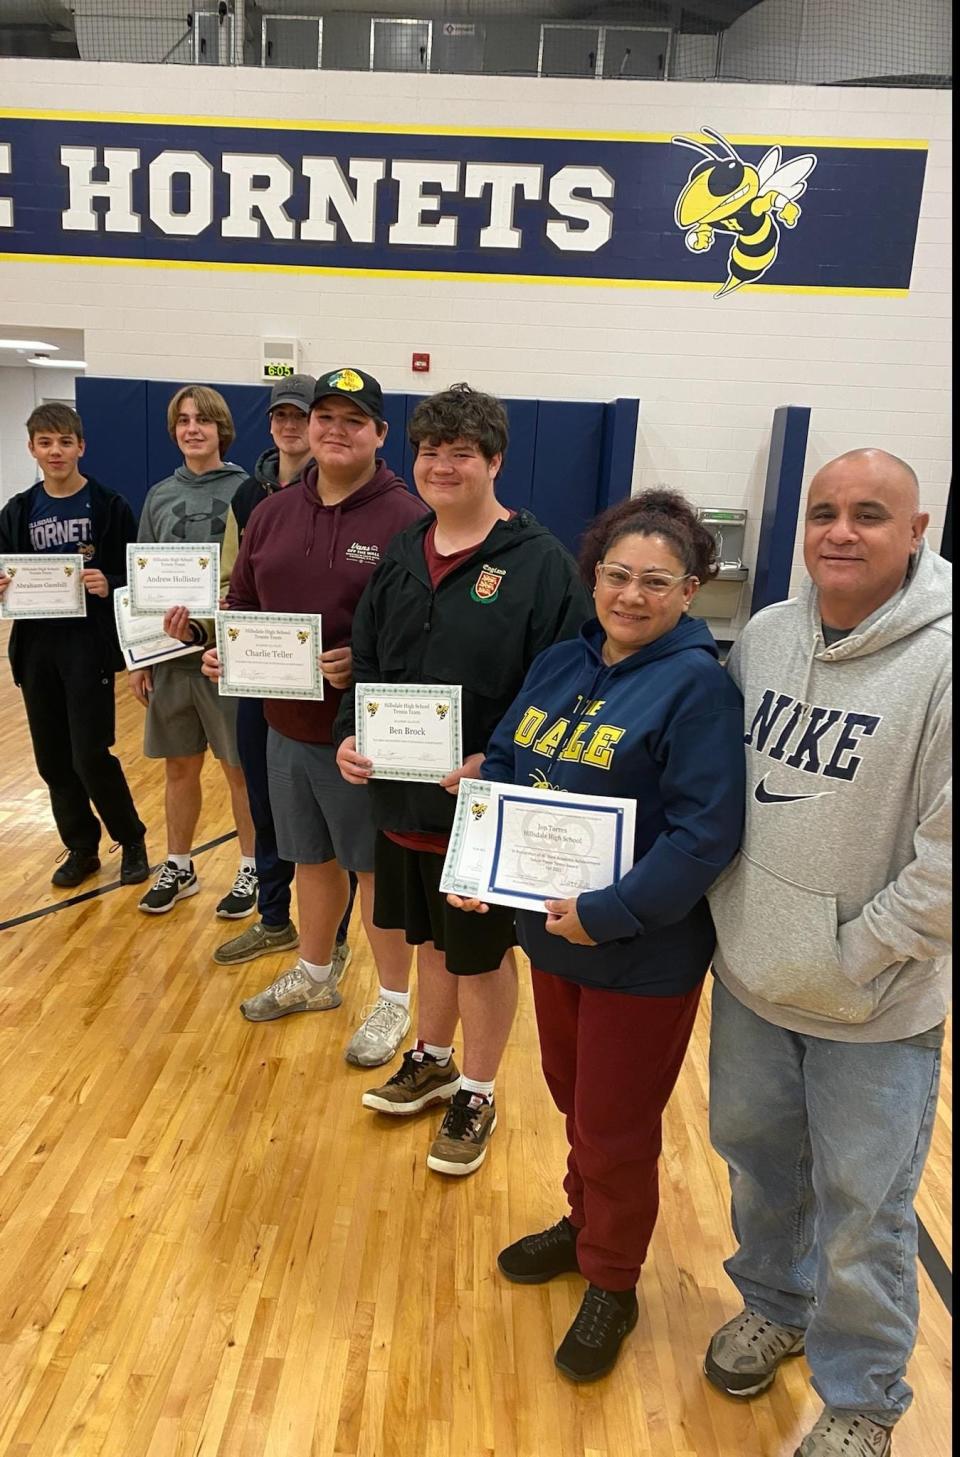 (Pictured from front to back): Jon Torres' parents Salvador and Herminia Torres representing their son, Ben Brock, Charlie Teller, Andrew Hollister, Sam Wiles, and Brohm Gambill. (Not Pictured): Jon Torres, Erik Hecklinger, Soren Gambill, Alex Portteus, and Broderick Miller.